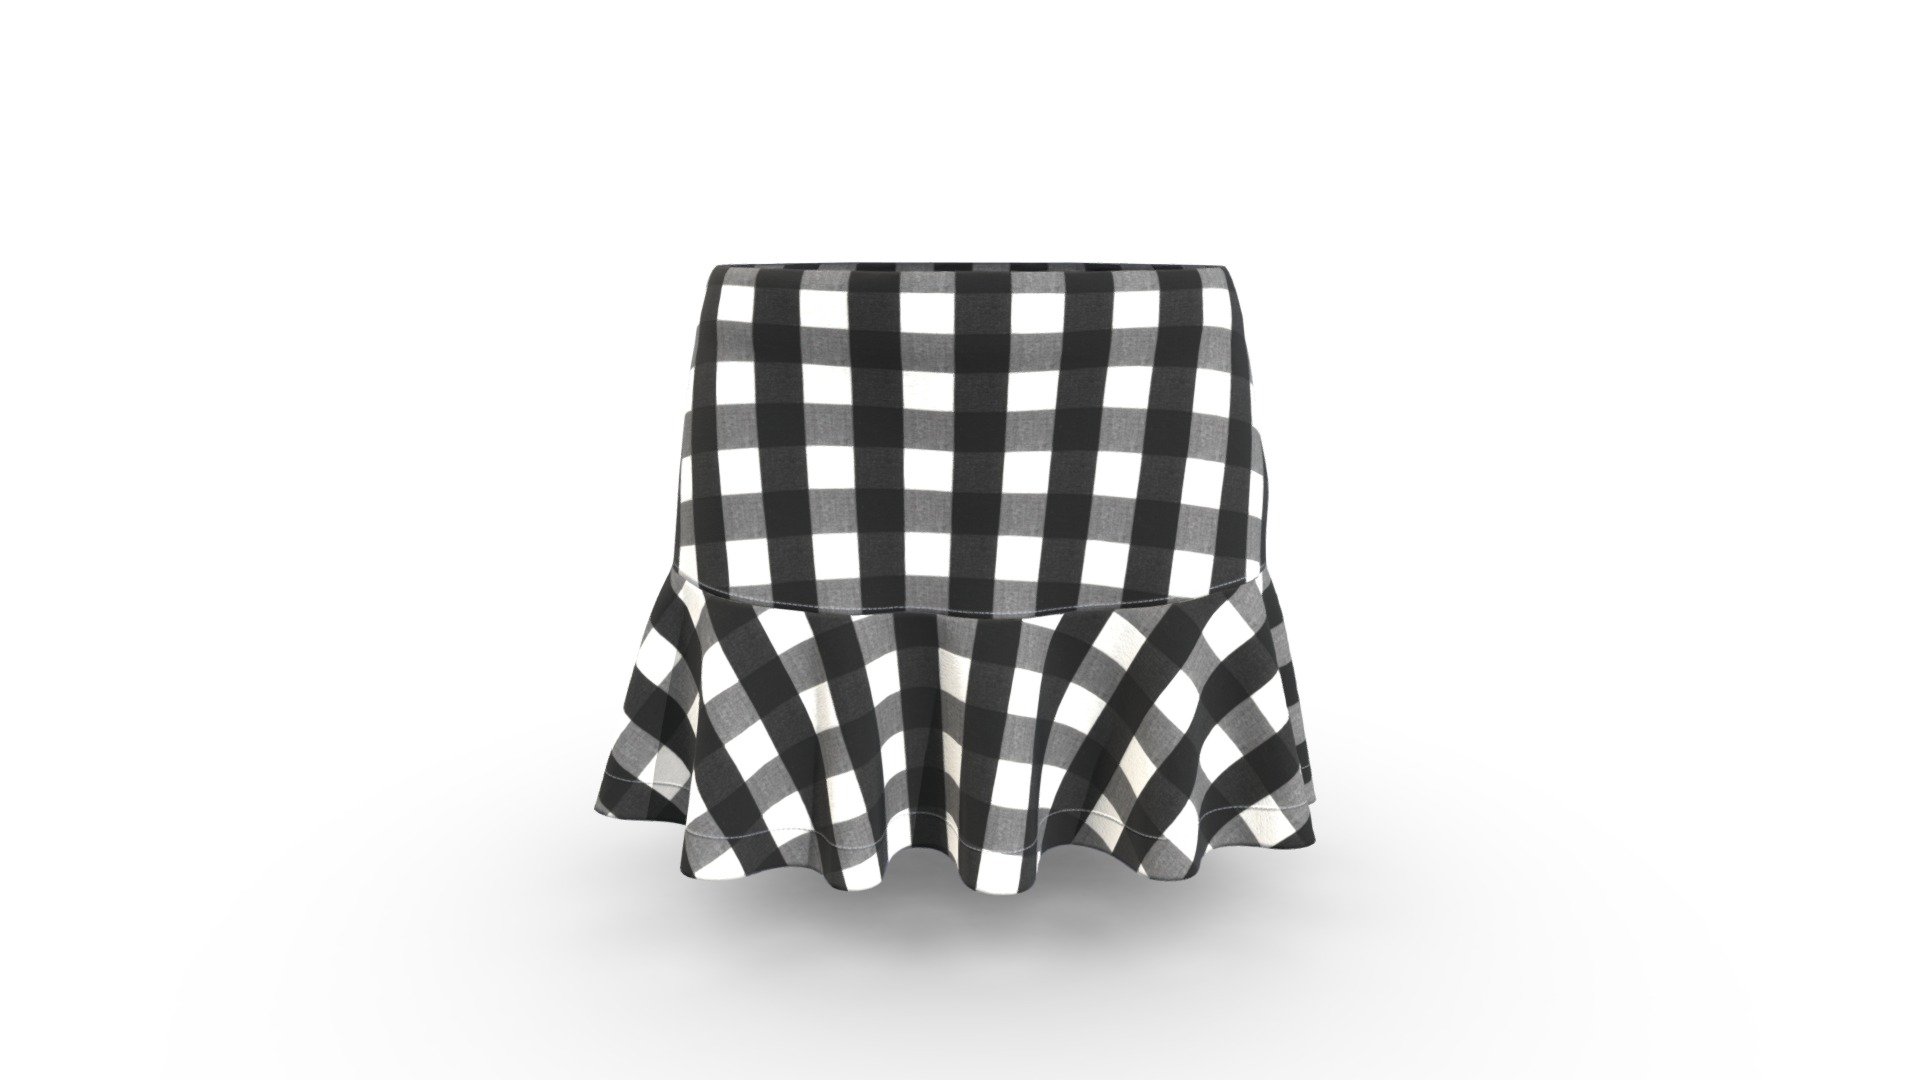 Women Fashionable Check Mini Skirt
Version V1.0

Realistic high detailed Women Skirt with high resolution textures. Model created by our unique processing &amp; Optimized for 3D web and AR / VR

SKU: BCVAR1220

Features

Optimized &amp; NON-Optimized obj model with 4K texture included


Optimized for AR/VR/MR
4K &amp; 2K fabric texture and details
Optimized model is 2.52MB
NON-Optimized model is 6.00MB
Unit measurement of obj is cm
Woven fabric &amp; print texture details included
GLB file in 2k texture size is 2.45MB
GLB file in 4k texture size is 8.05MB (Game &amp; Animation Ready)
Unit measurement of glb is meter
Suitable for web application configurator development.
Fully unwrap UV
The model has 1 material
Includes high detailed normal map
Unit measurement was inch
Triangular Mesh with 14.5k Vertices
Texture map: Base color, OcclusionRoughnessMetallic(ORM), Normal

For more details or custom order send email: hello@binarycloth.com

Website:binarycloth.com - Women Fashionable Check Mini Skirt - Buy Royalty Free 3D model by BINARYCLOTH (@binaryclothofficial) 3d model